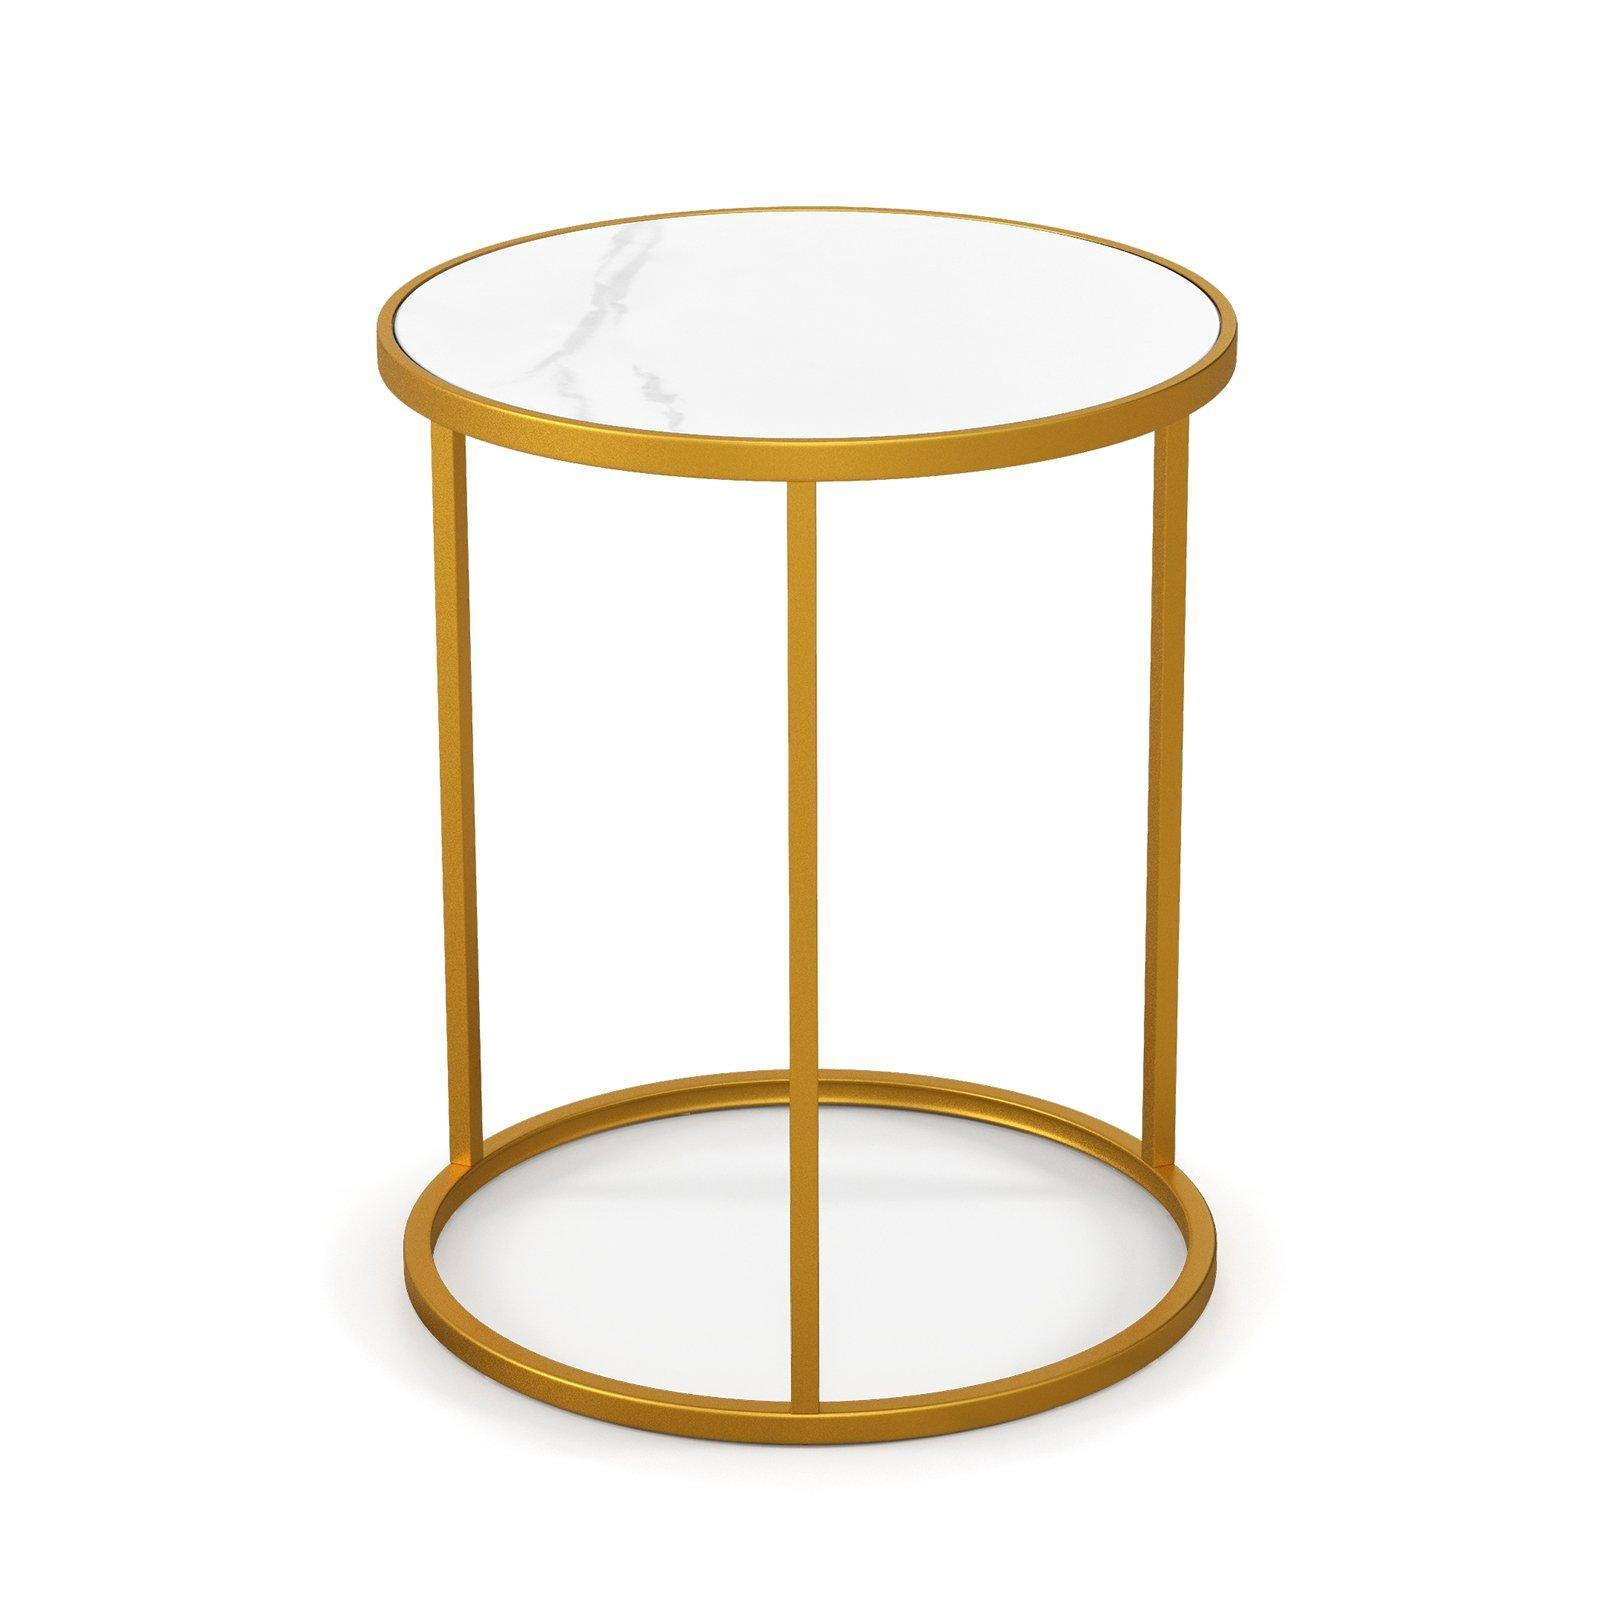 59cm Tall Marble Top Round Side Table Modern Sofa End Table Home Accent Bedside Table - image 1